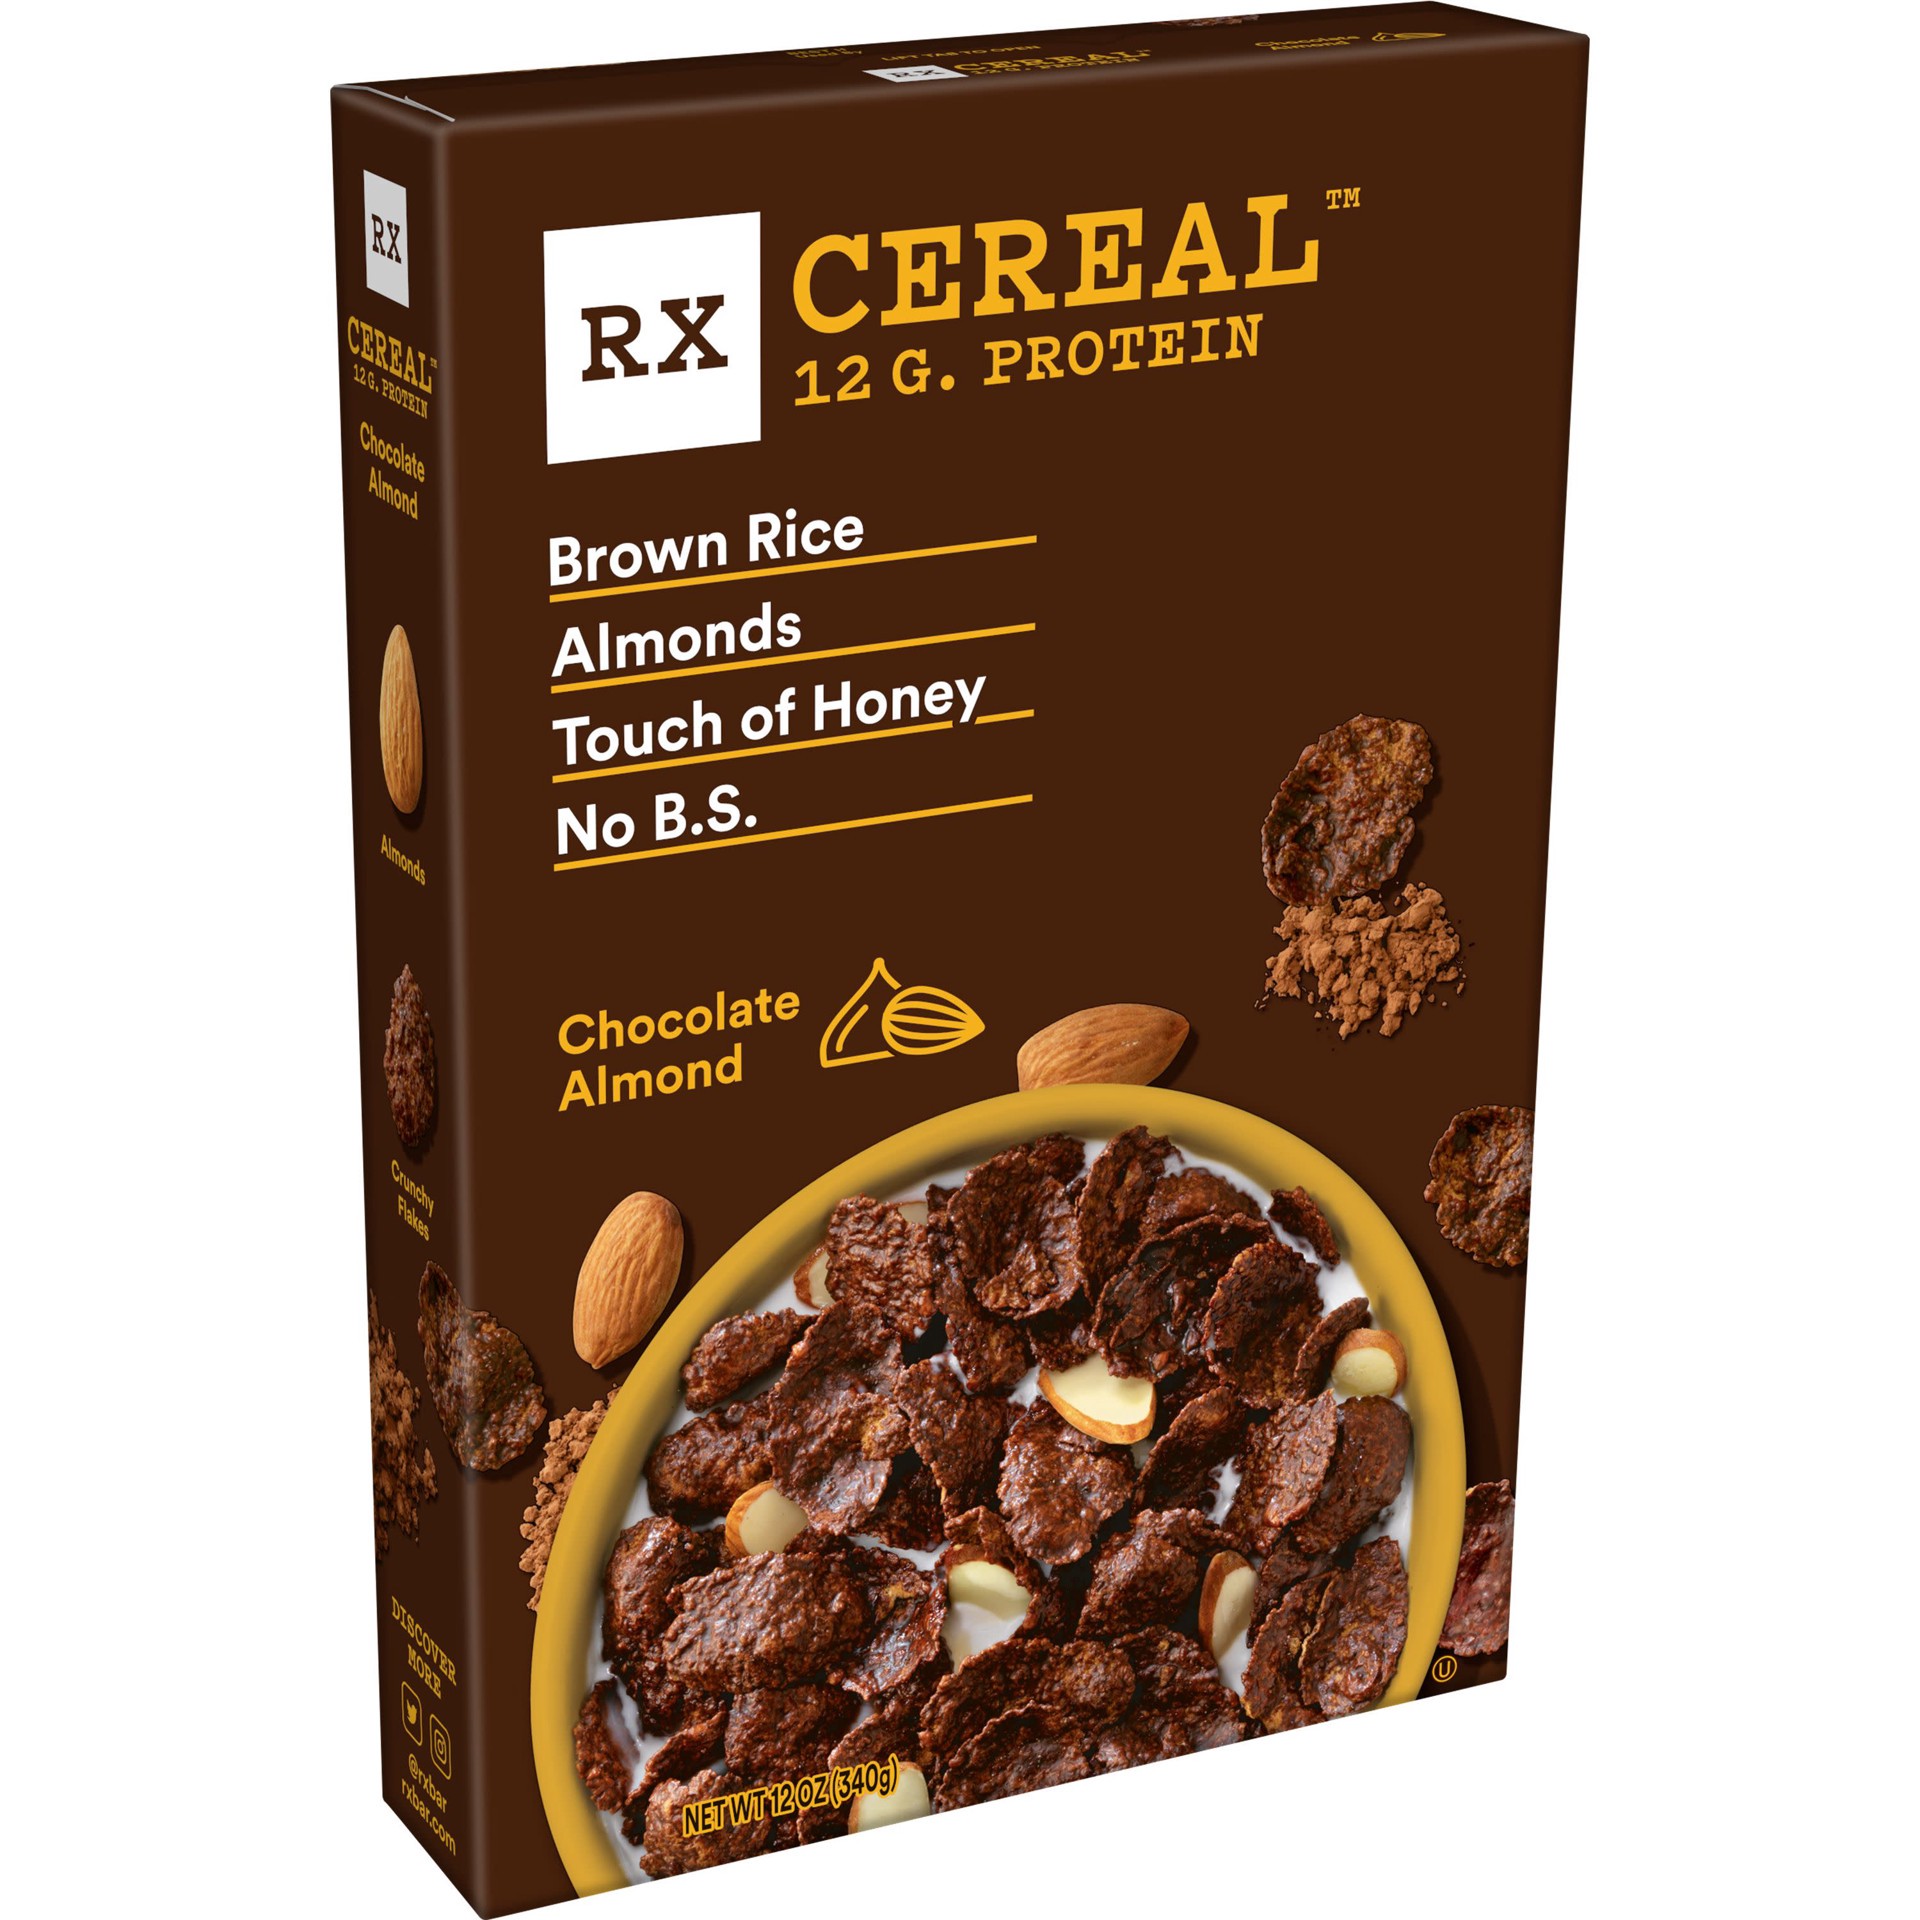 slide 1 of 8, RX Cereal Chocolate Almond, Breakfast Cereal, 12g Protein, 12oz Box, 1 Box, 12 oz